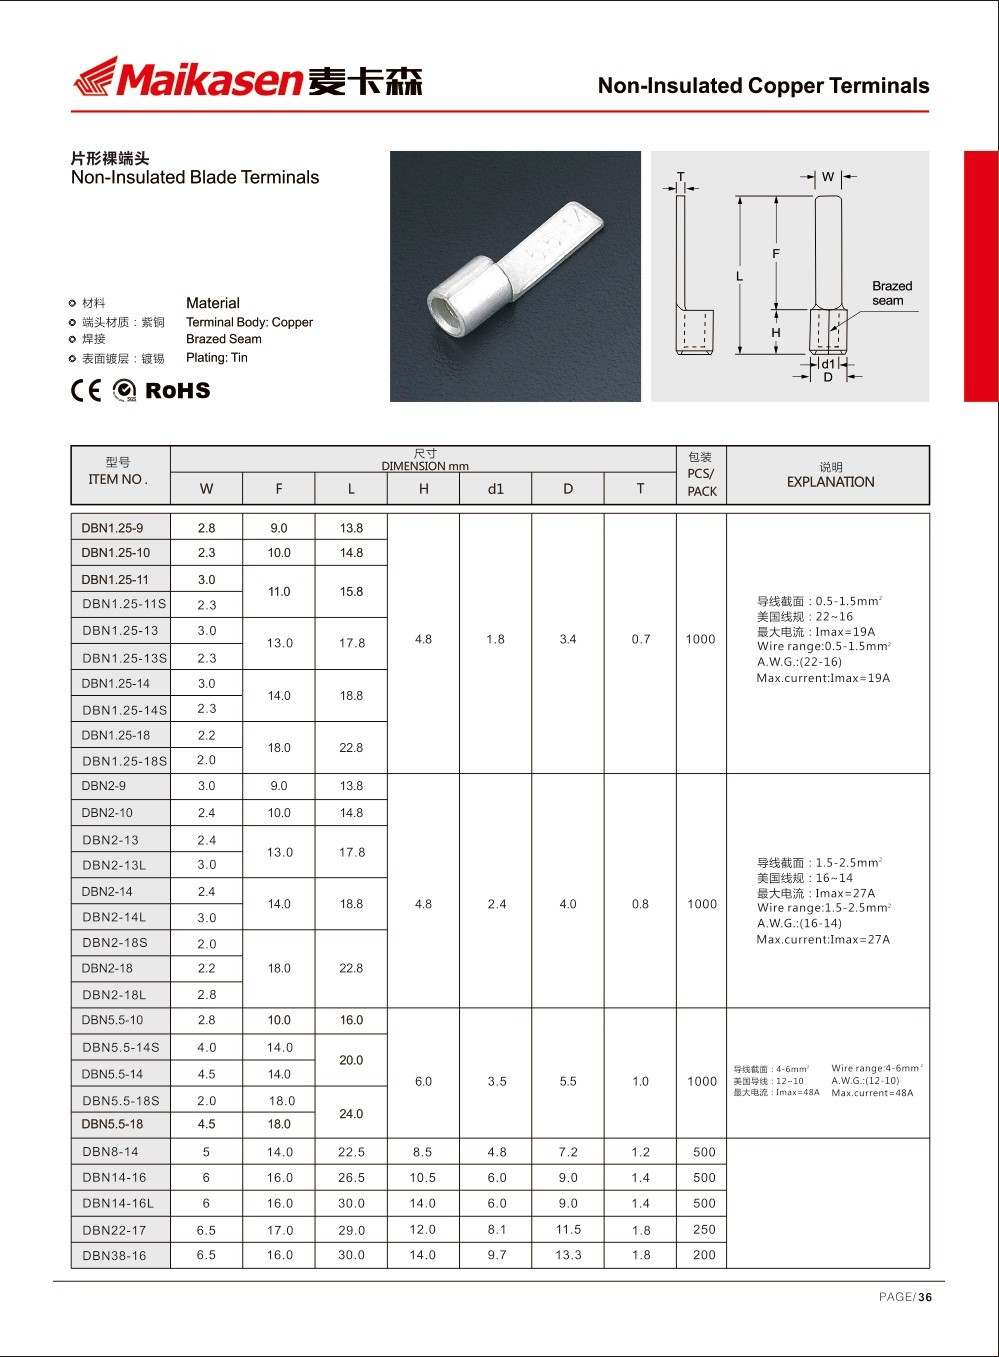 MKS battery terminals factory price for shipping